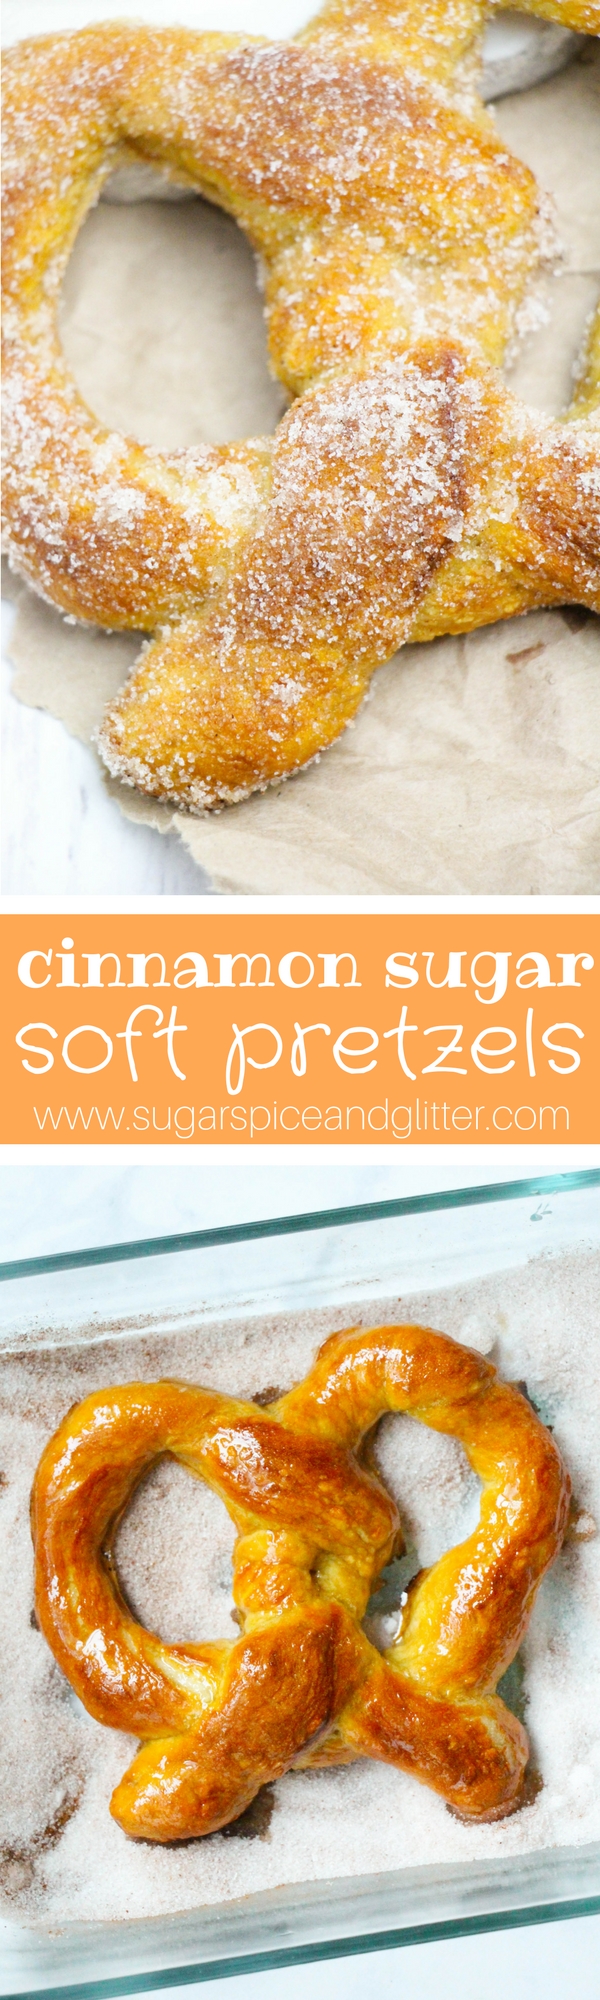 Cinnamon Sugar Pretzels – Better Than You Can Get at the Mall! (with Video)